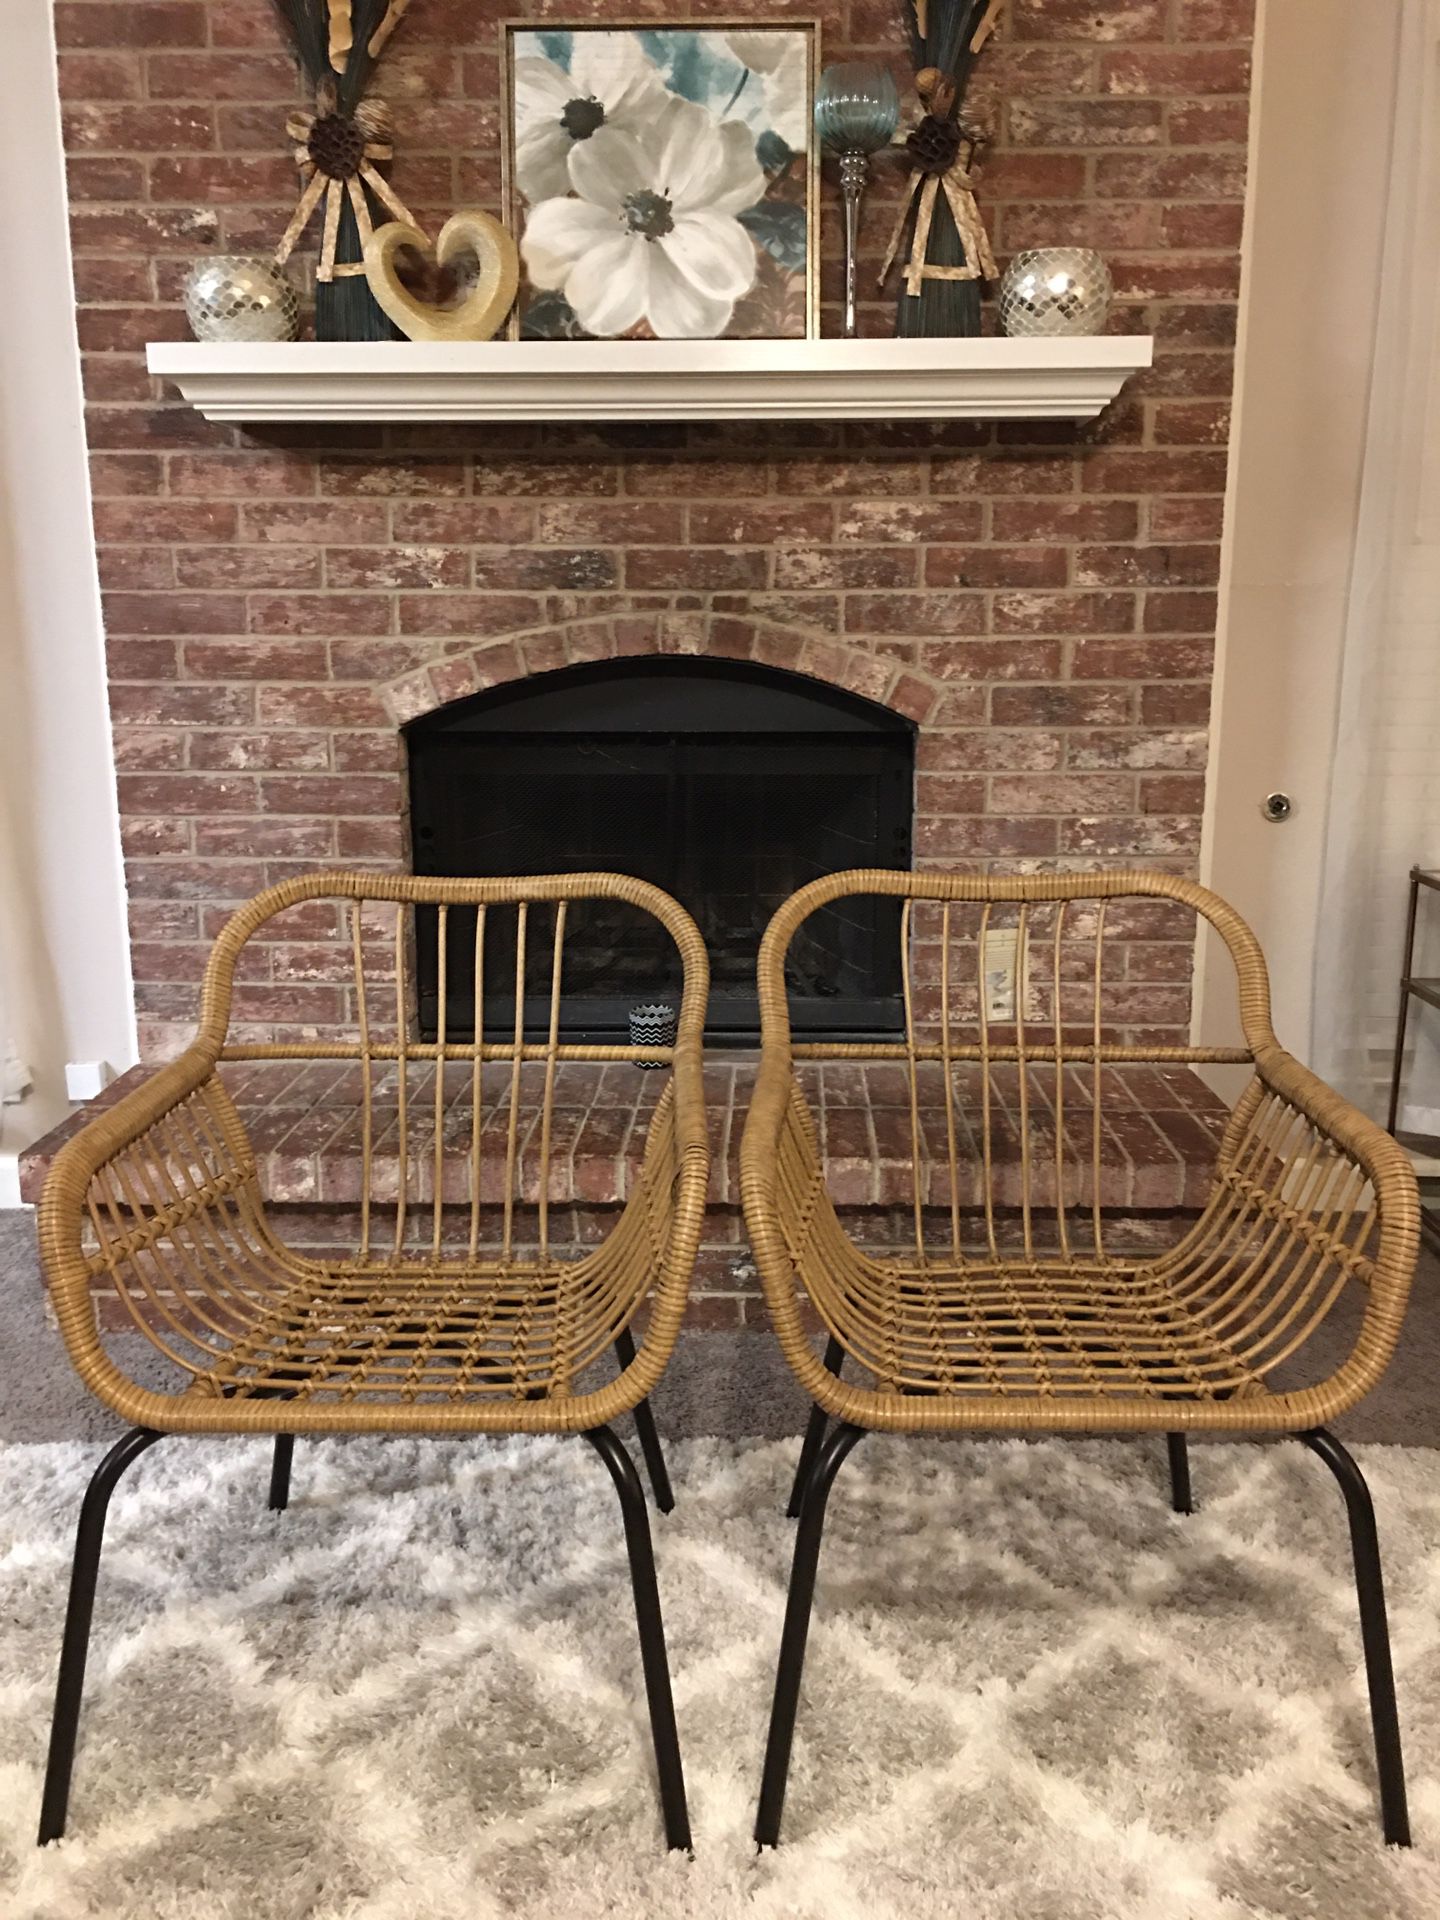 BRAND NEW OUT OF THE BOX, NEVER USED SET of 2 Patio Chairs ((READ DESCRIPTION BELOW))